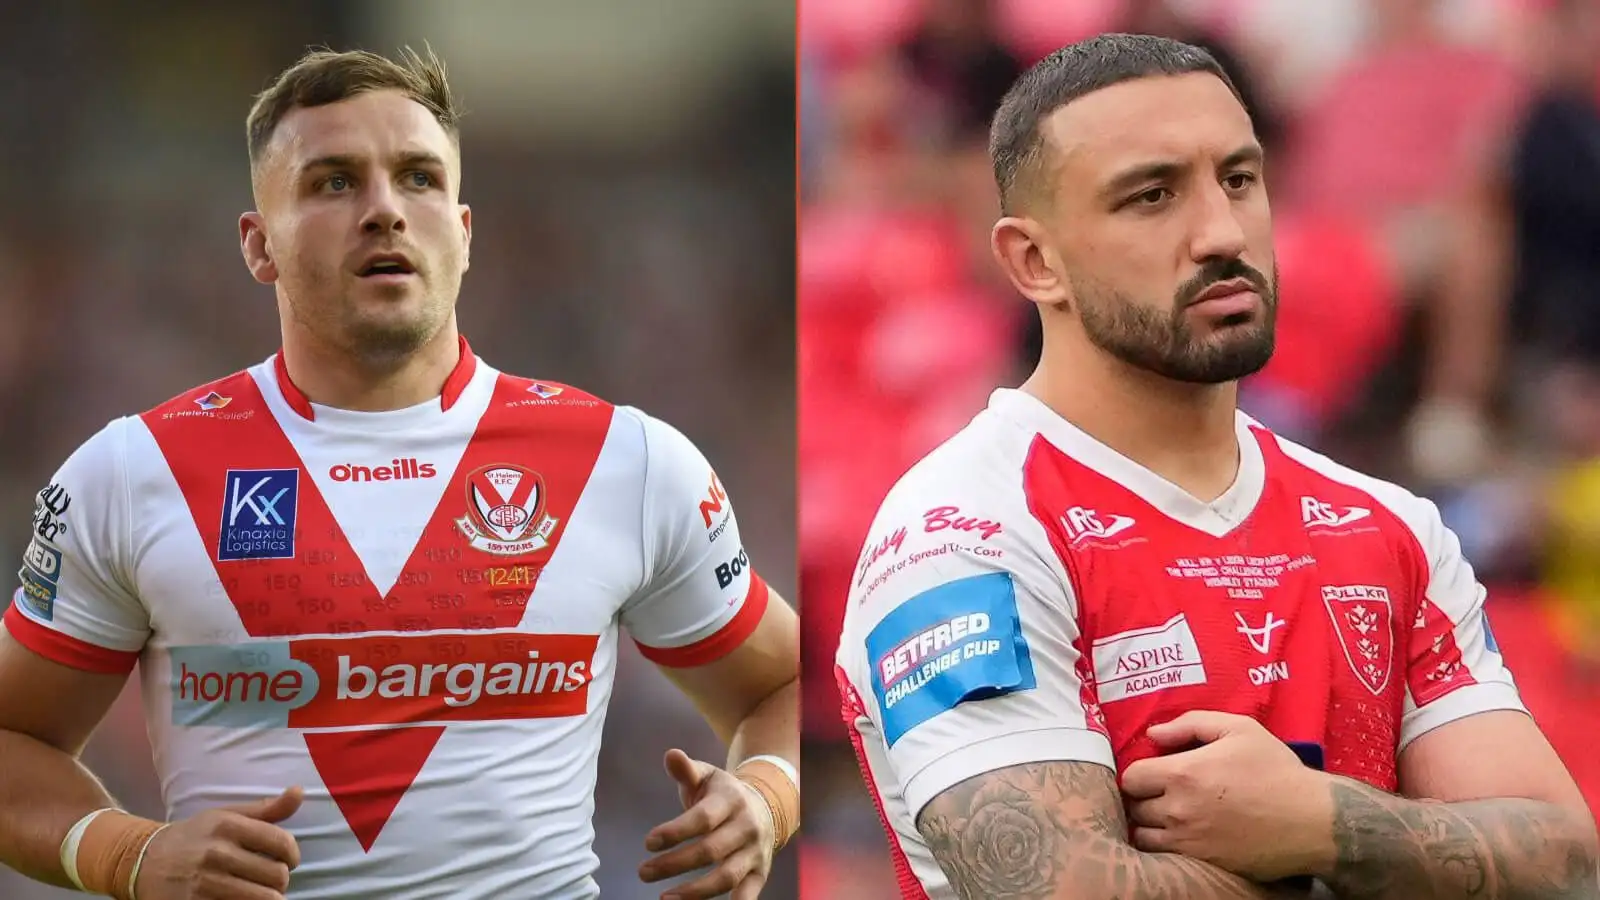 St Helens and Hull KR stars handed suspensions; Joe Greenwood free to play after red card